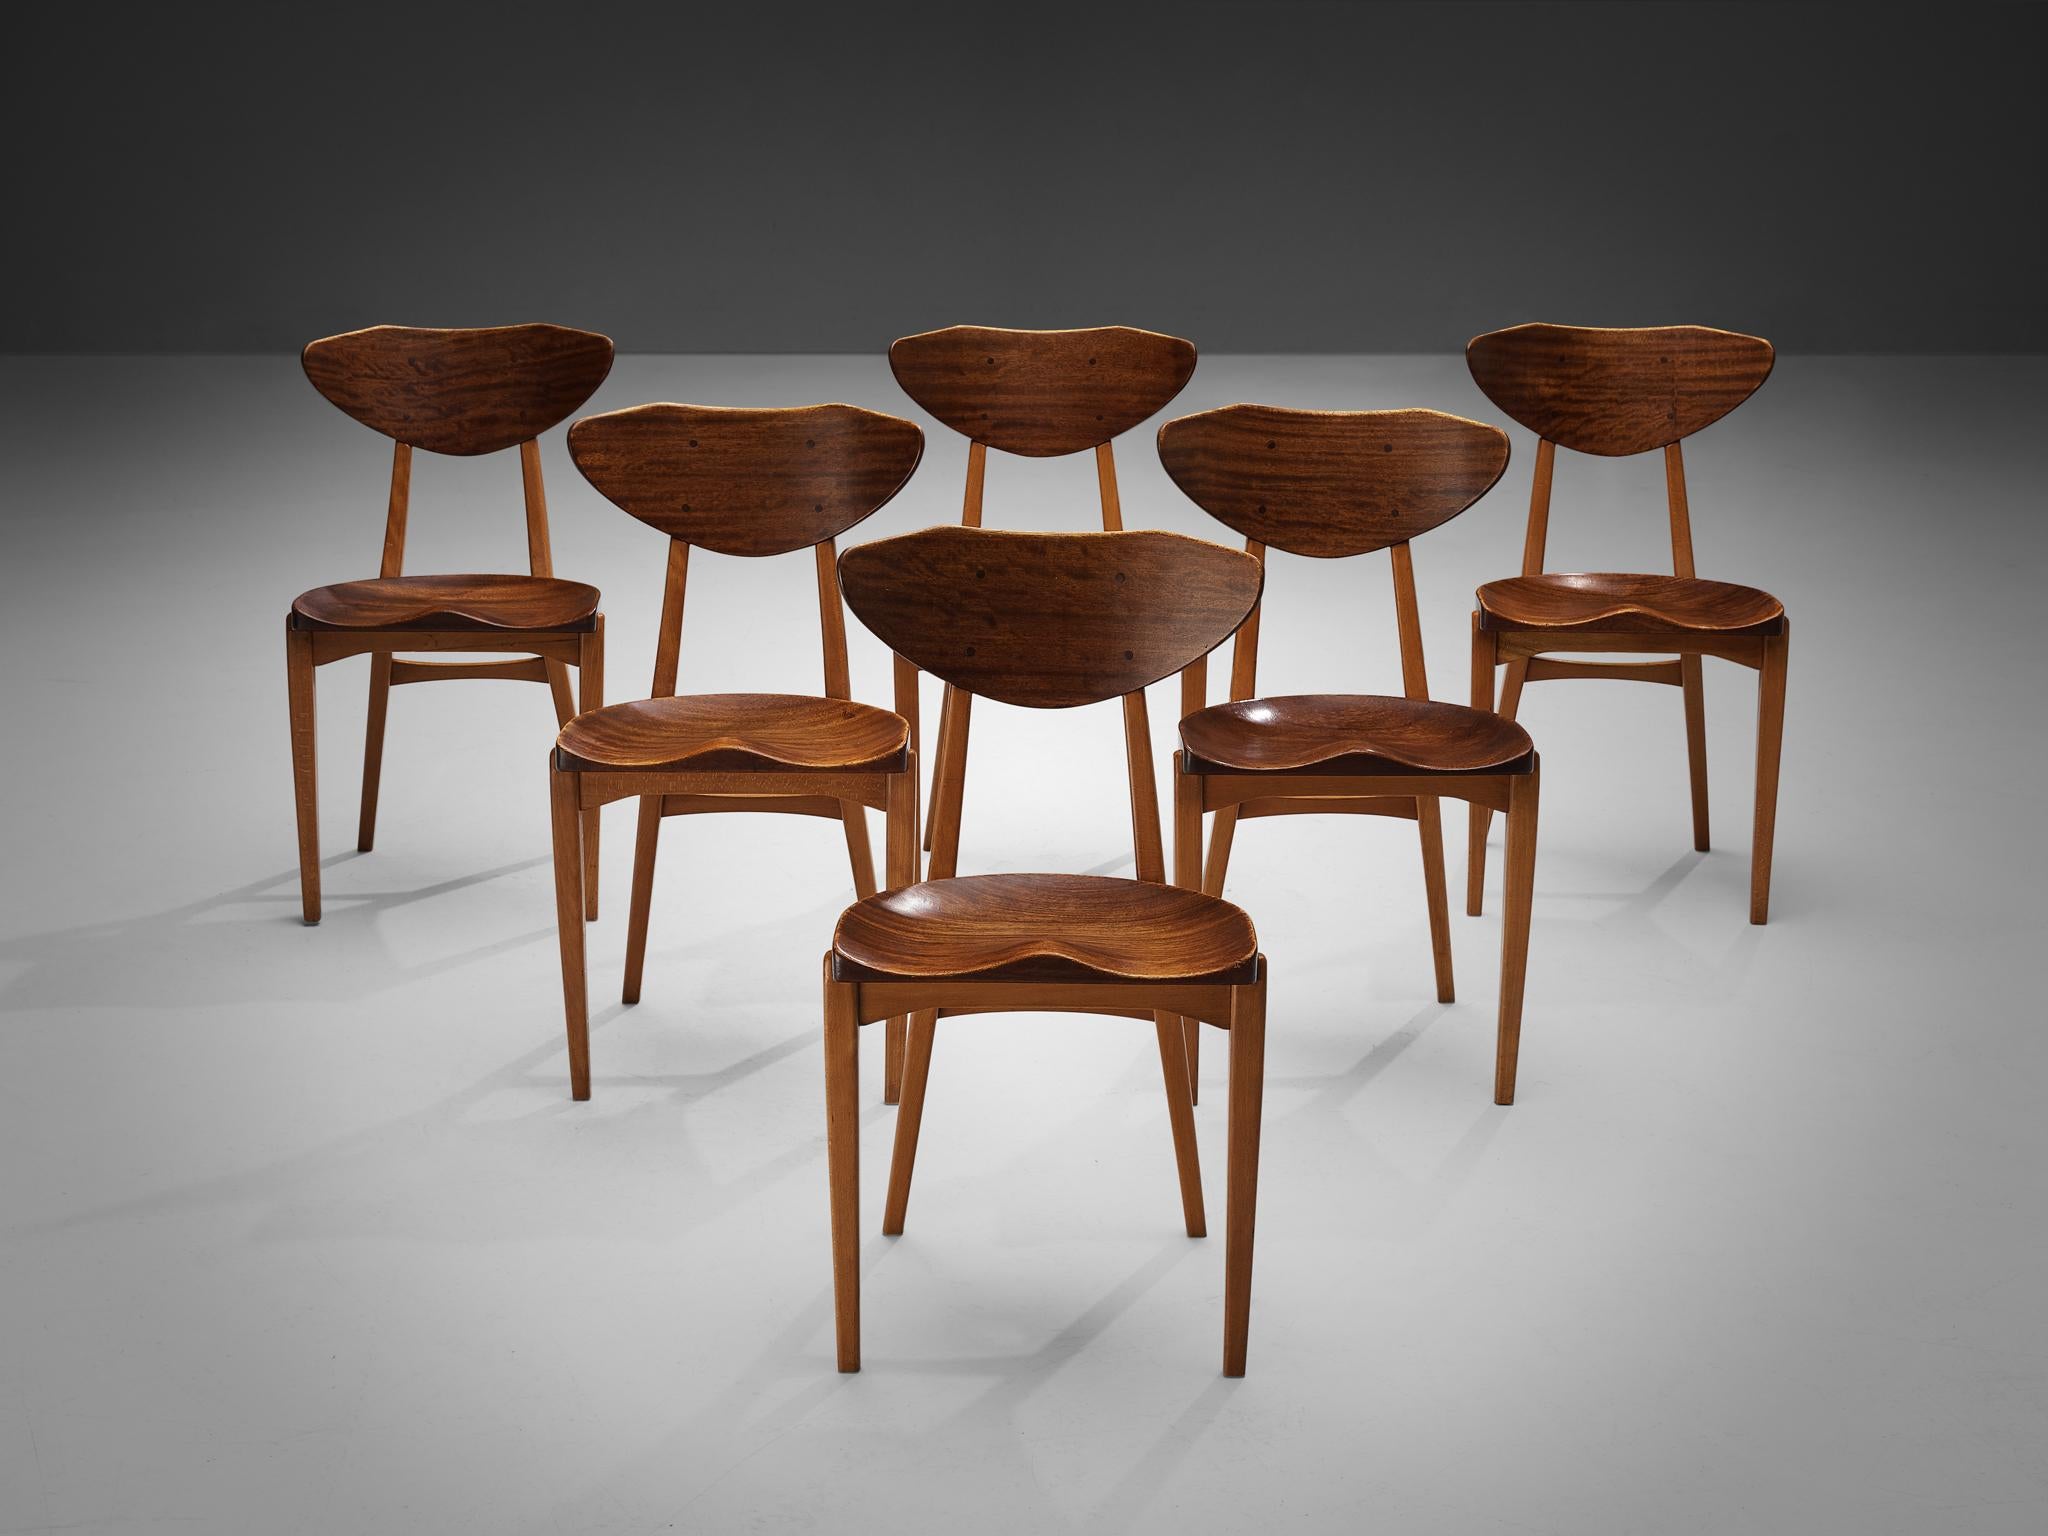 Richard Jensen and Kjaerulff Rasmussen, set of six dining chairs, mahogany, oak, Denmark, 1960s

This striking set of dining chairs was designed by Richard Jensen and Kjaerulff Rasmussen. What characterizes this set of chairs is the combination of